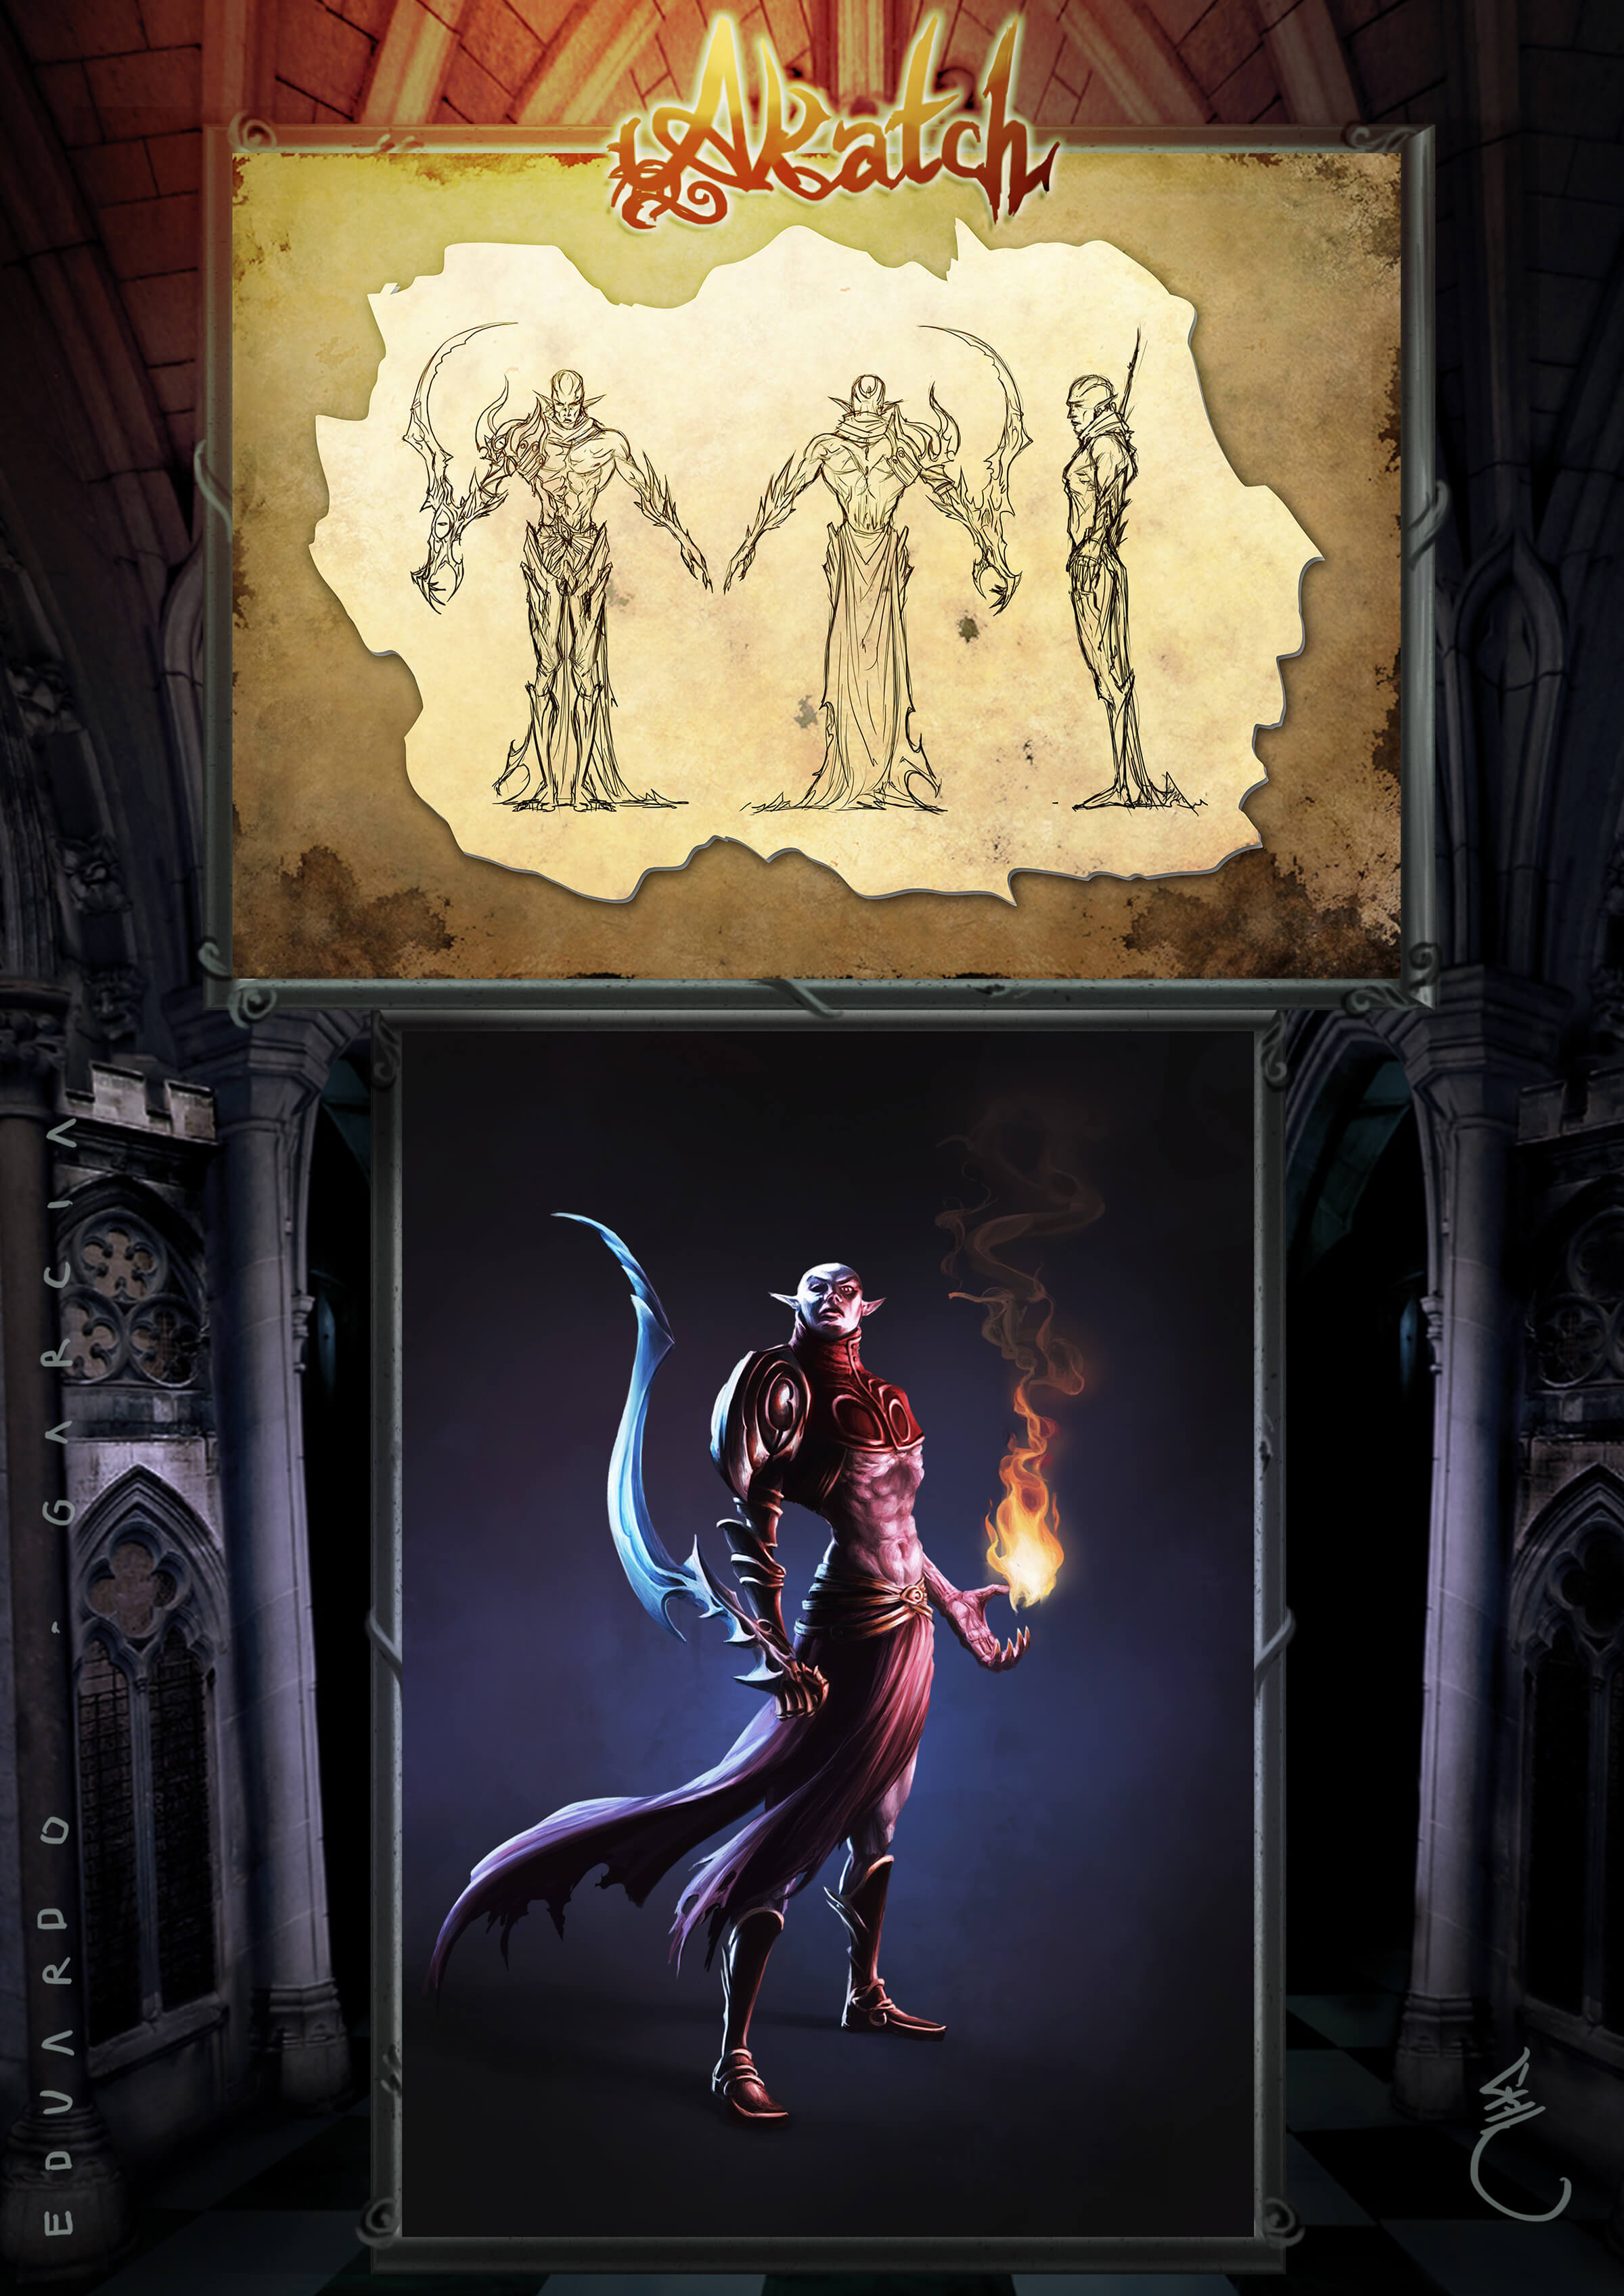 A demonic figure stands proudly with an ornate, curved blade in one hand, and a ball of flame in the other.